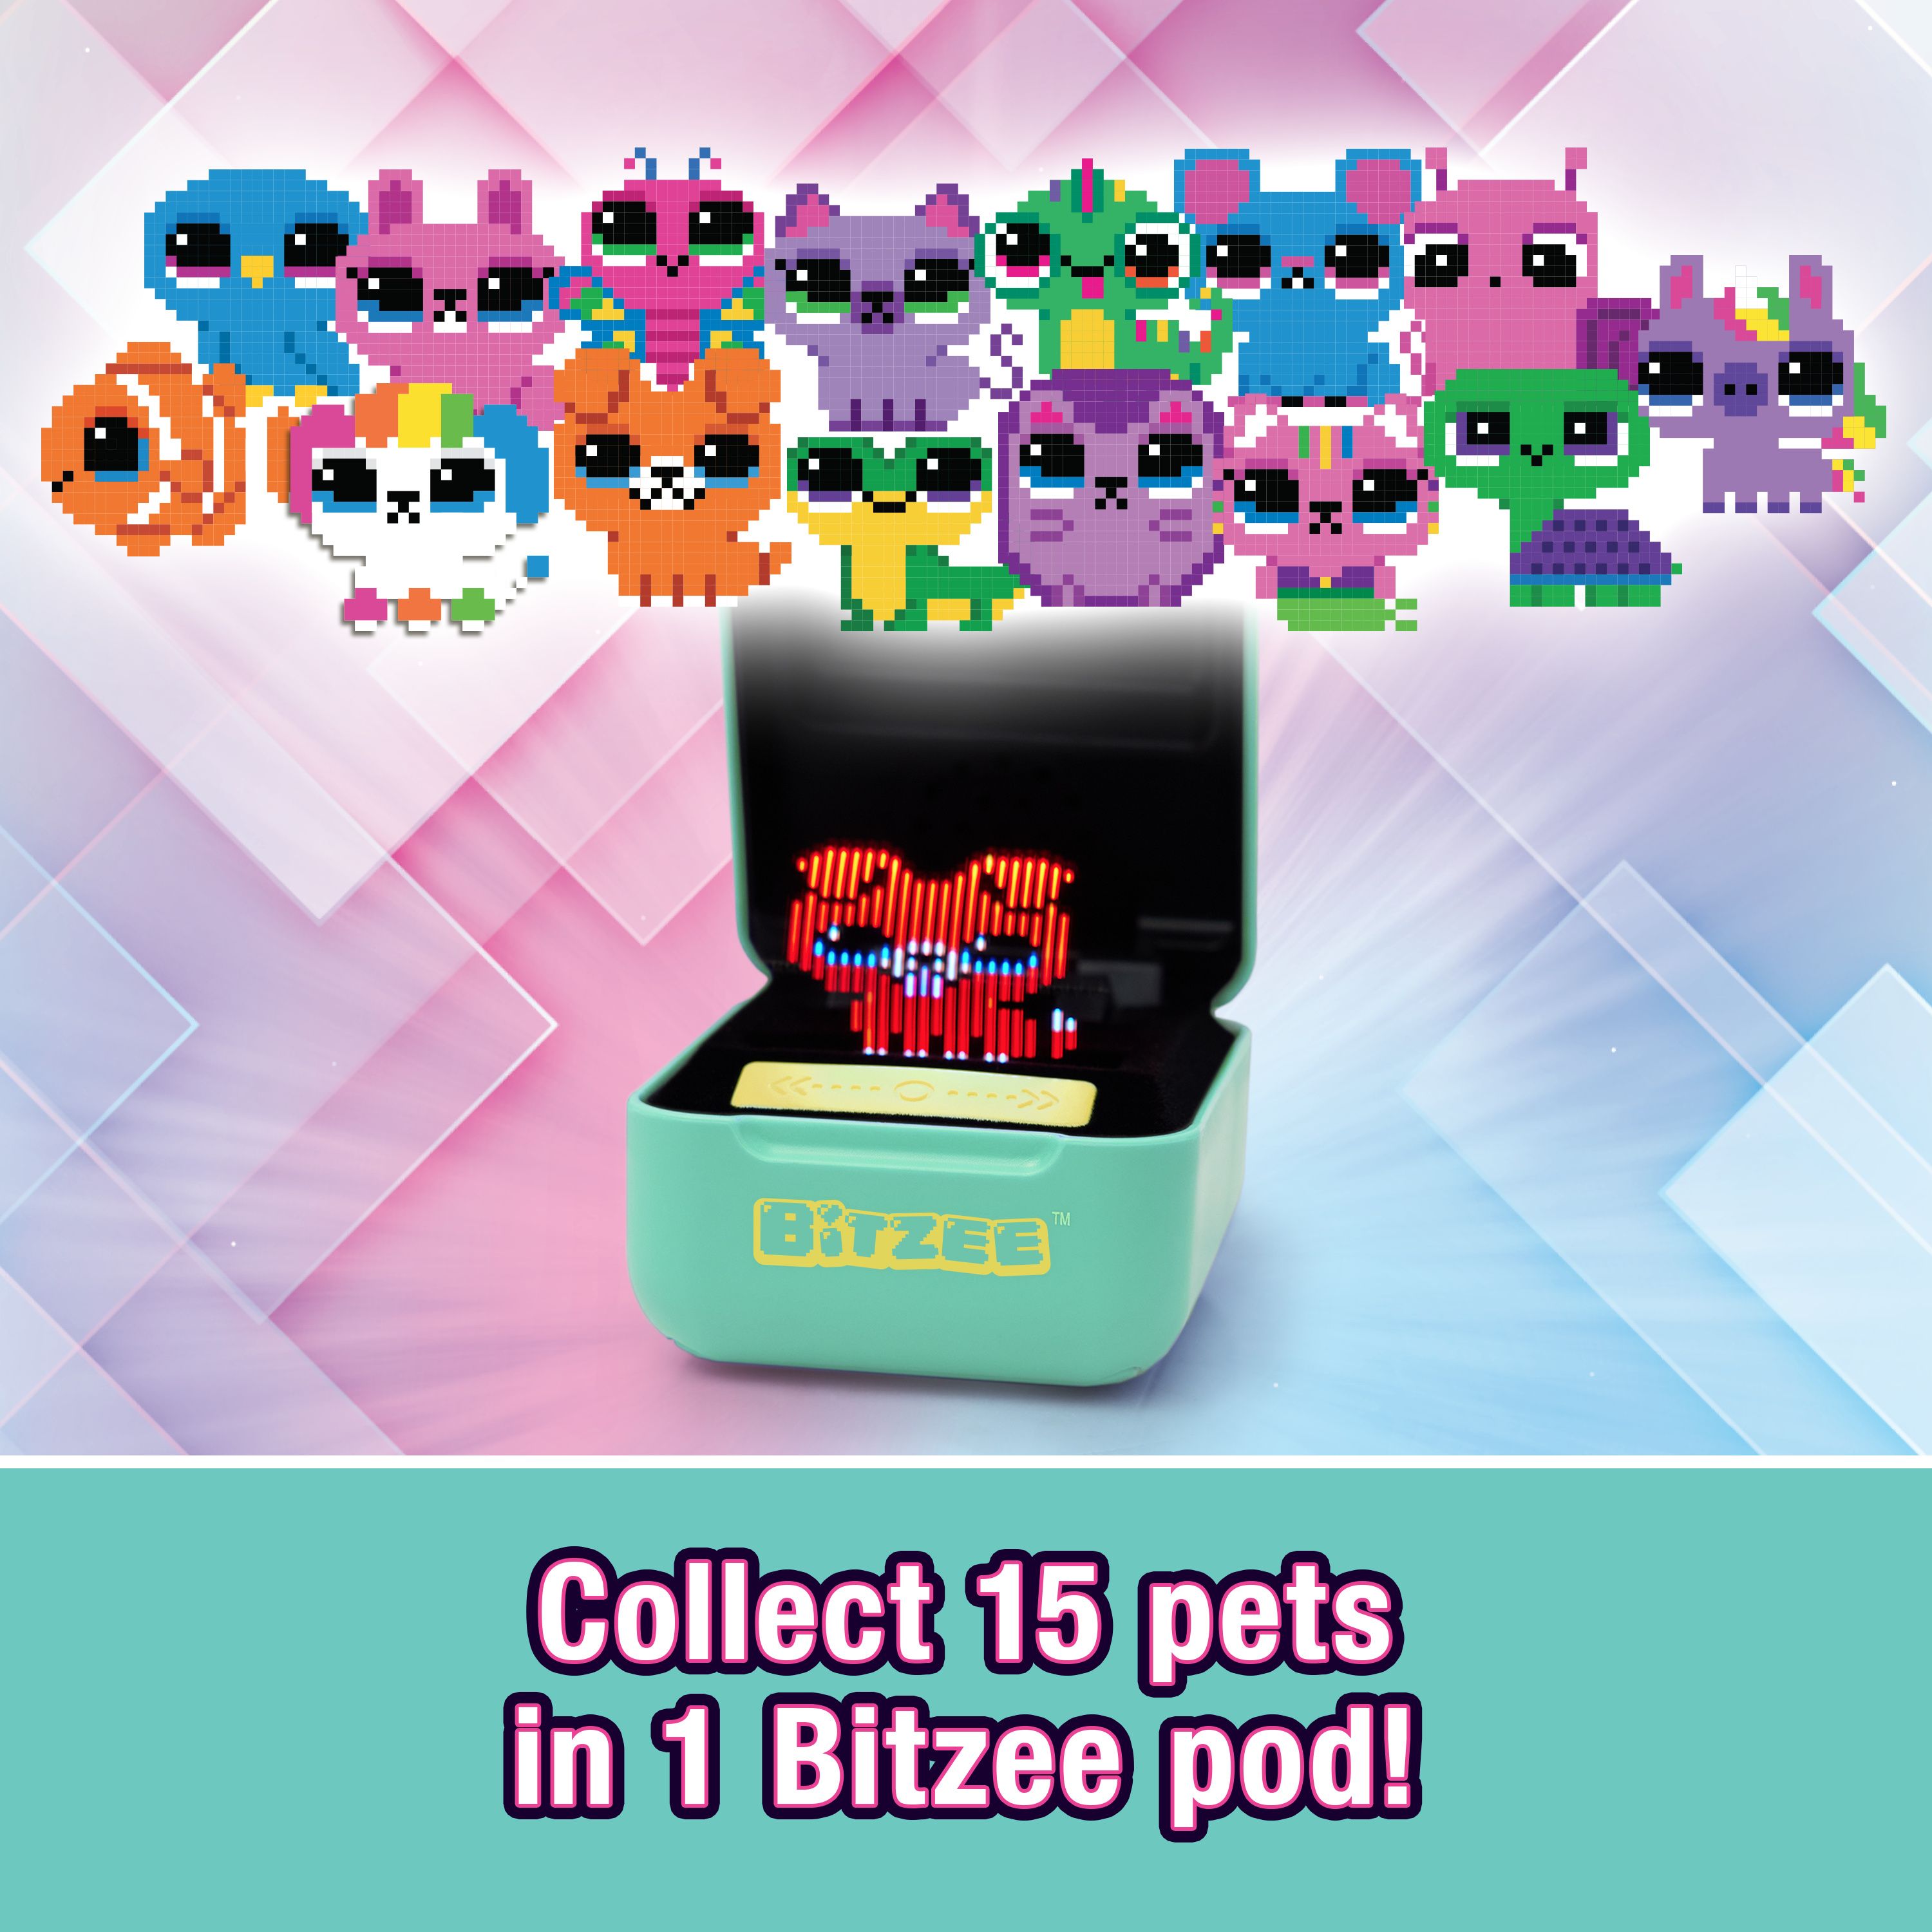 Collect 15 pets in 1 Bitzee pod!